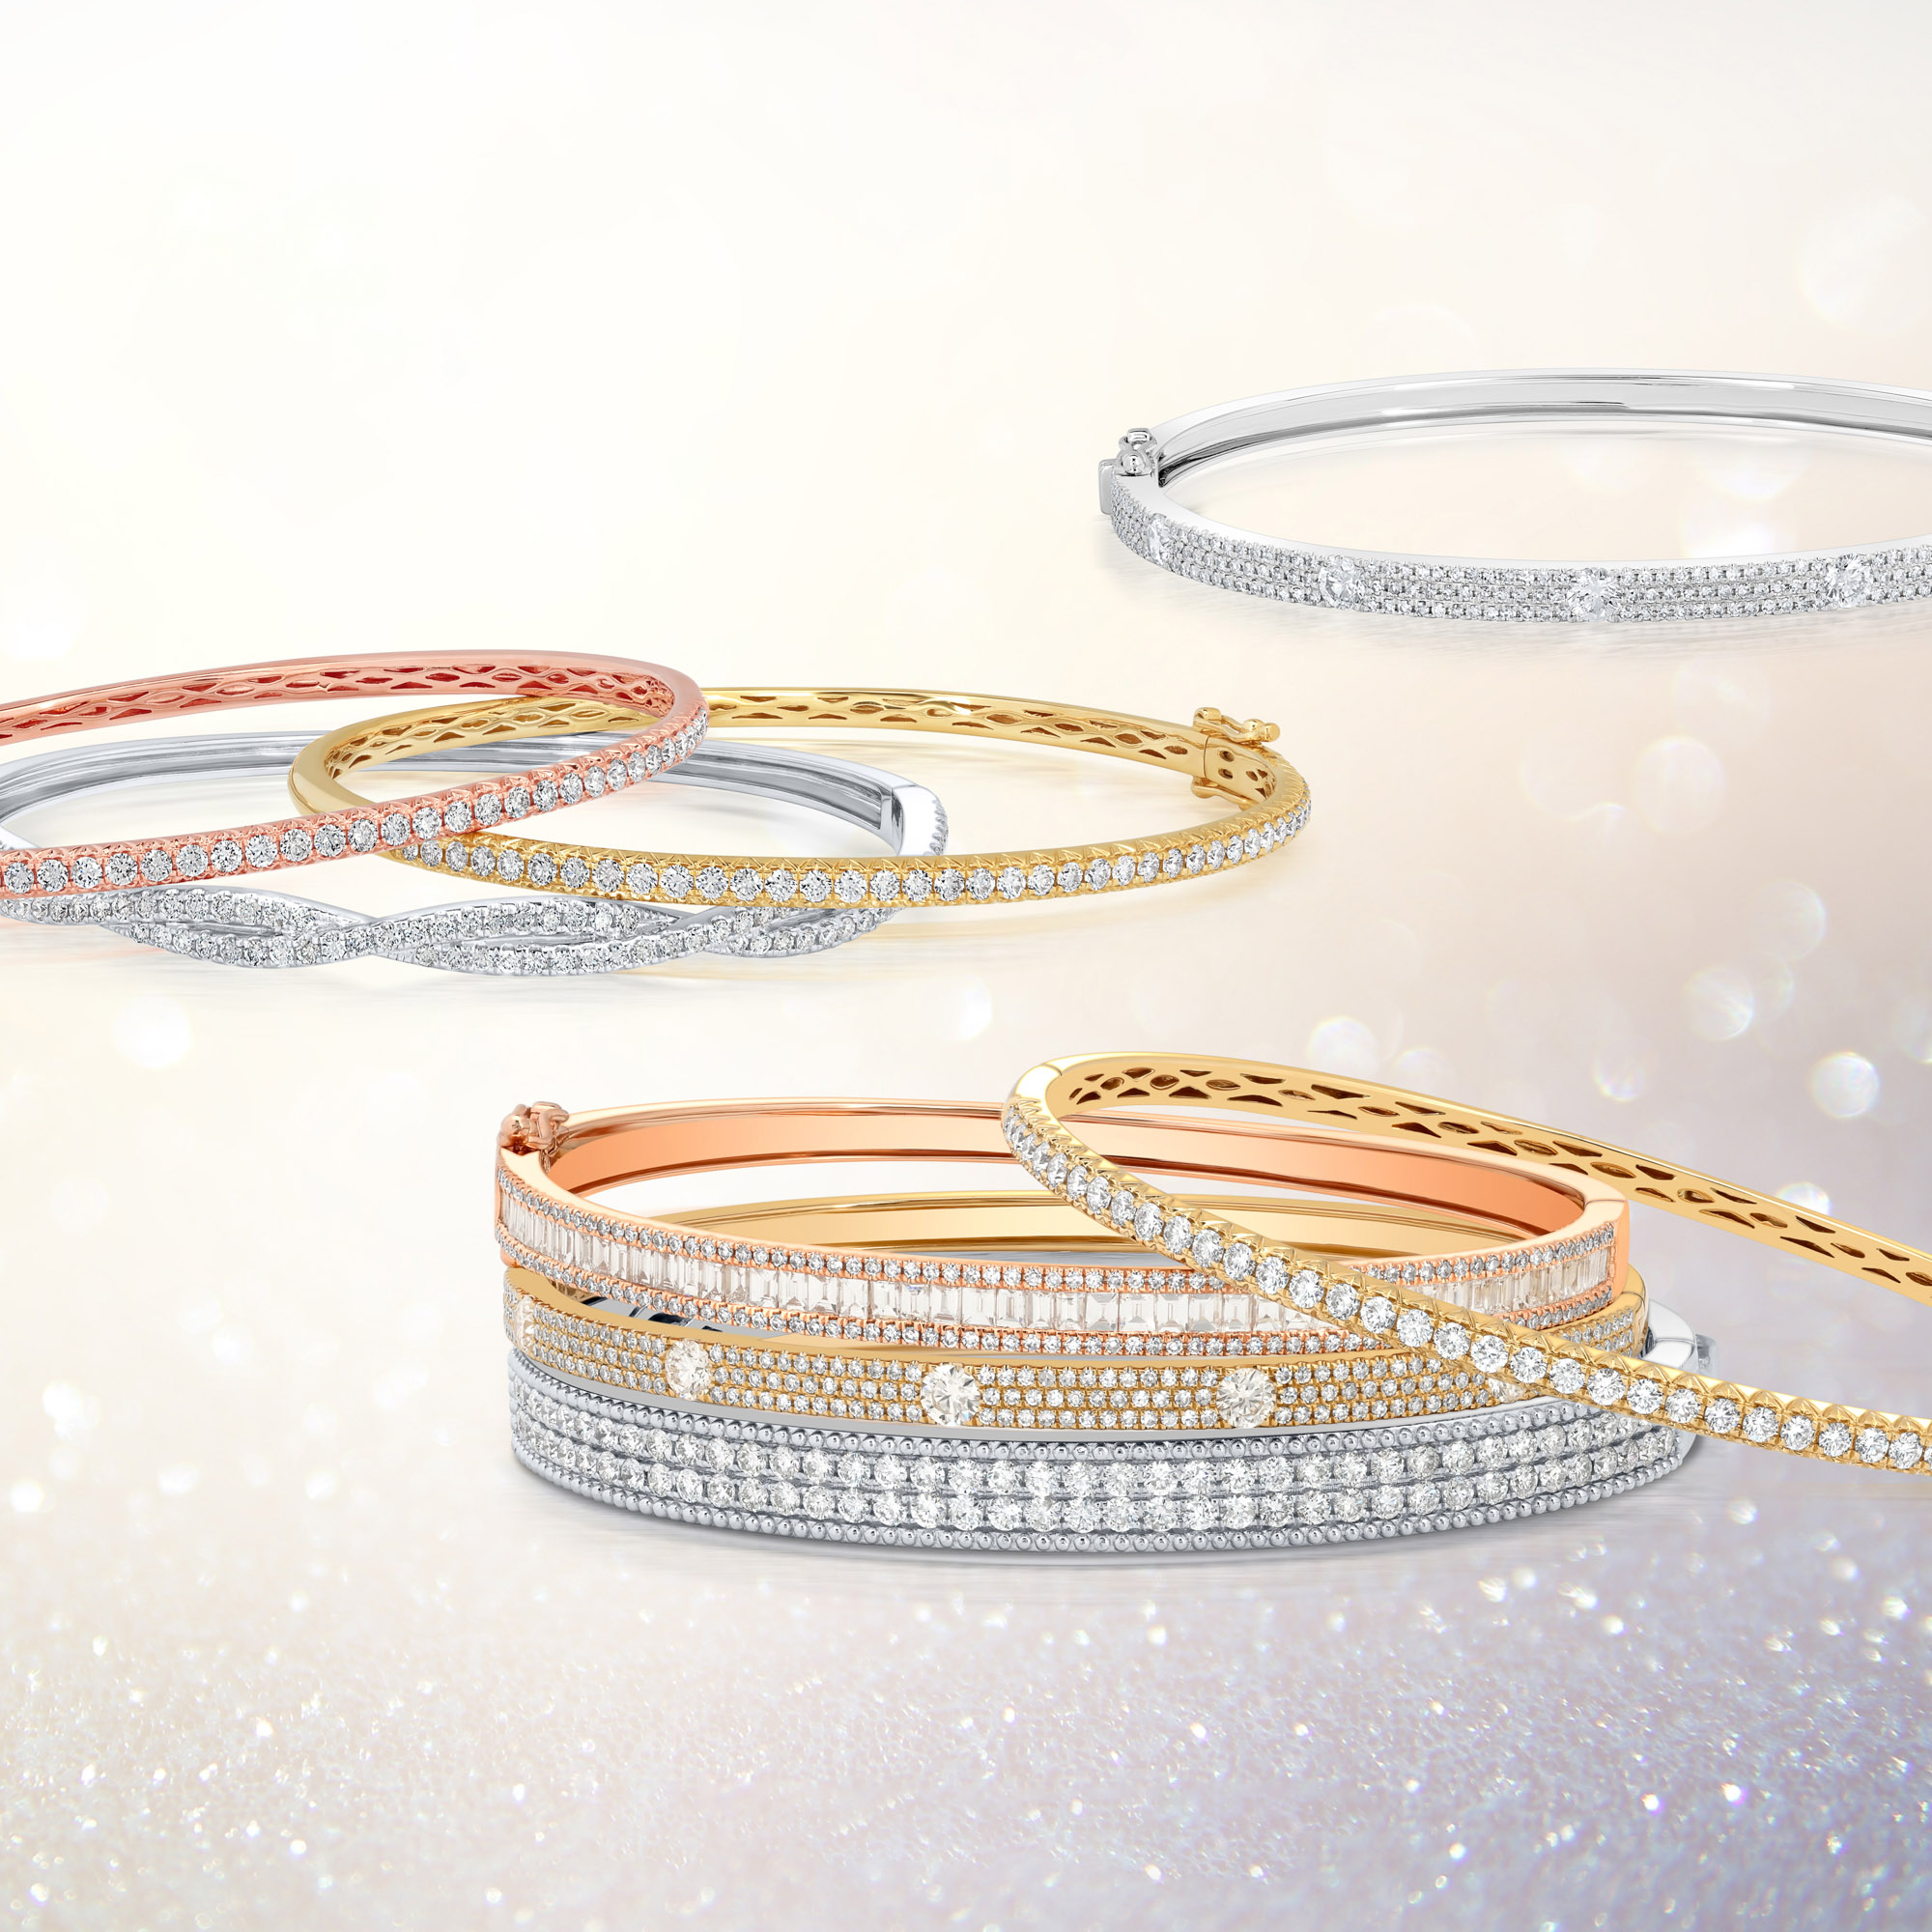 assortment of diamond bracelets studded with diamonds in white yellow and rose gold done by Expozme Photography a Los Angeles Based Product Photography eCommerce Photography Studio its all about great photography